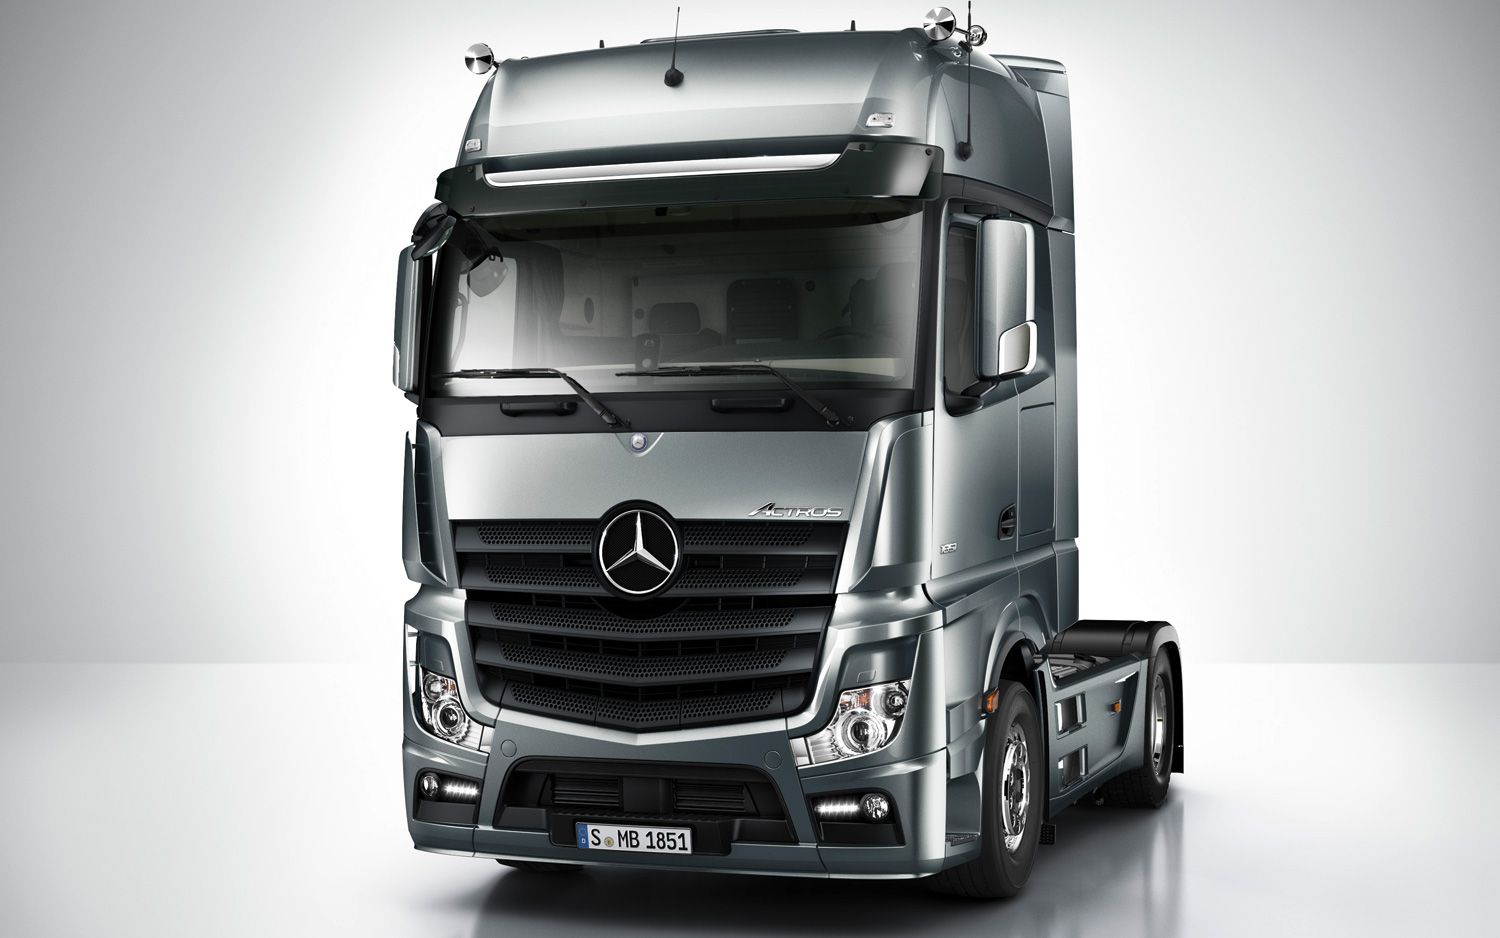 Mercedes Benz Actros Wallpapers Vehicles Hq Mercedes Benz Actros Pictures 4k Wallpapers 2019